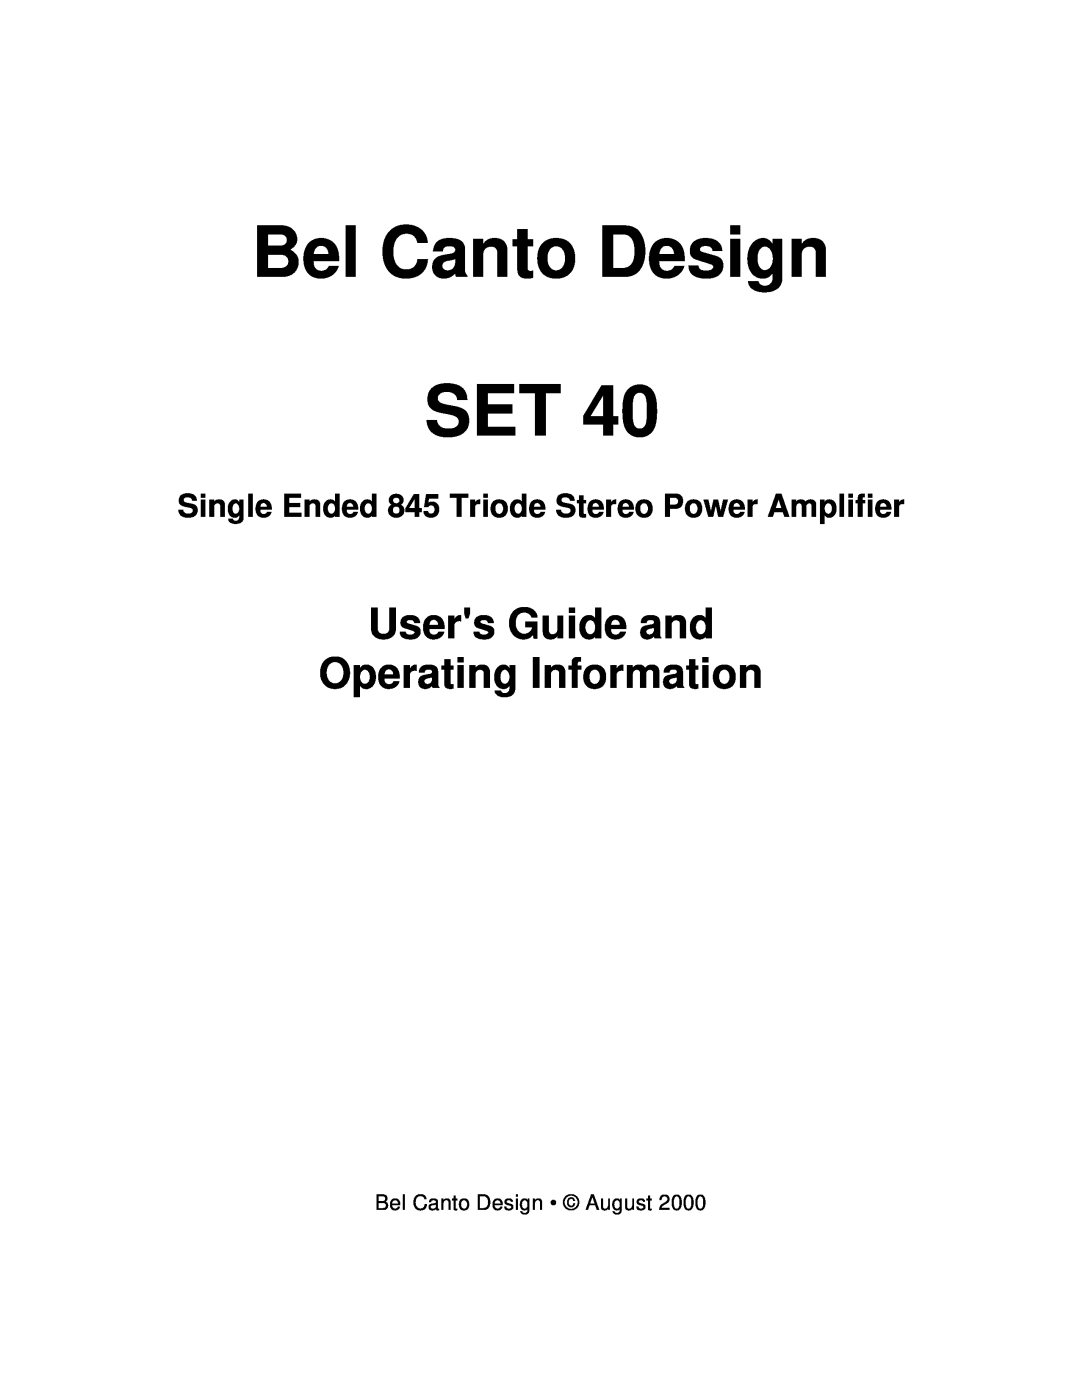 Bel Canto Design SET 40 manual Users Guide and Operating Information, Single Ended 845 Triode Stereo Power Amplifier 